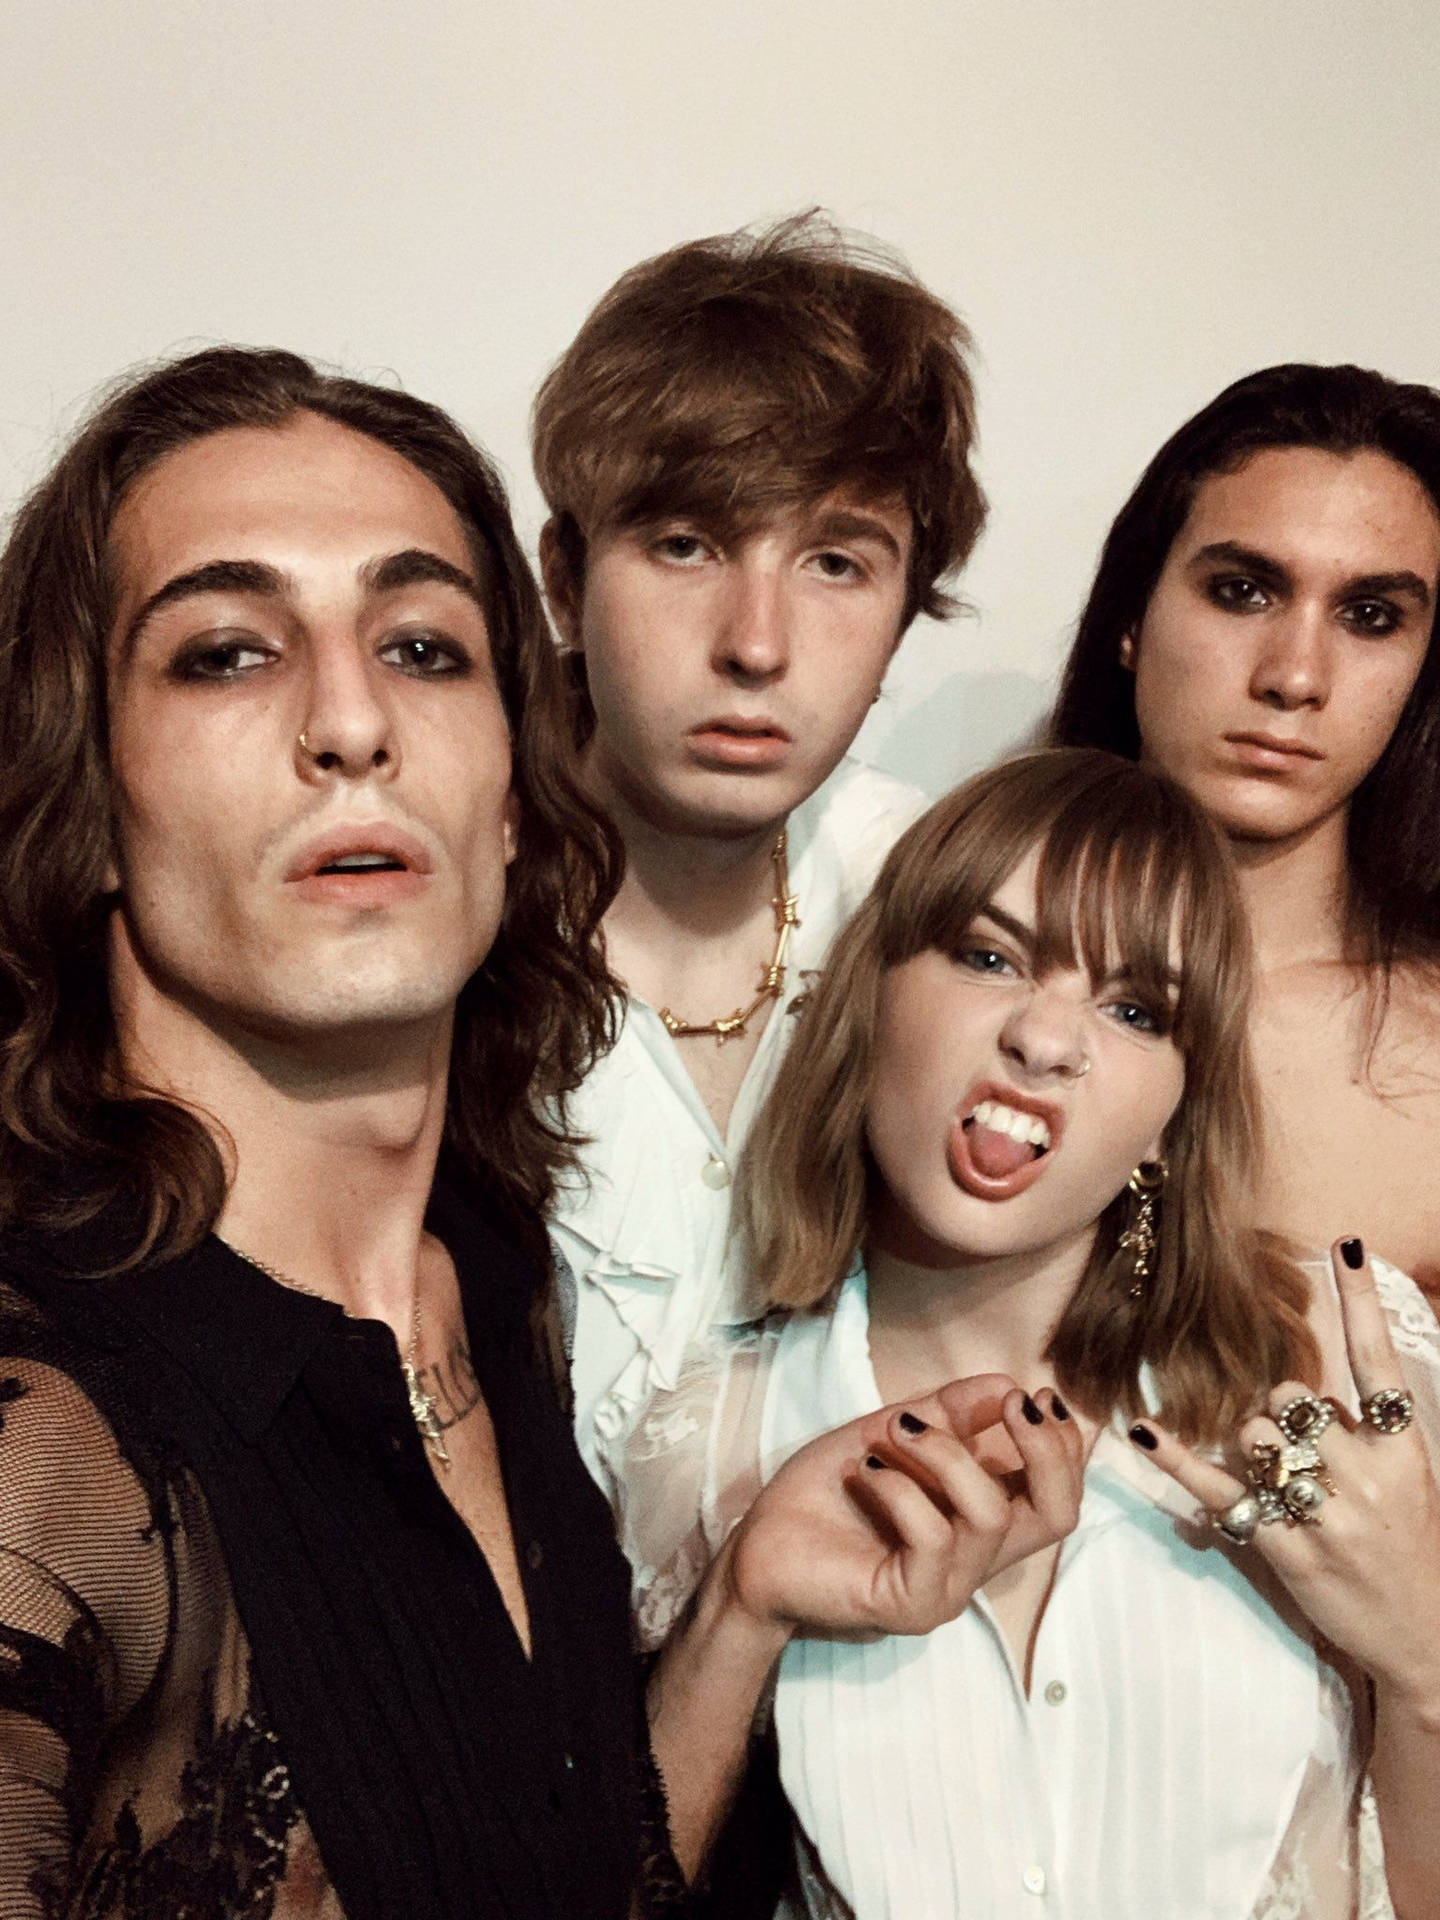 Maneskin Different Facial Expressions